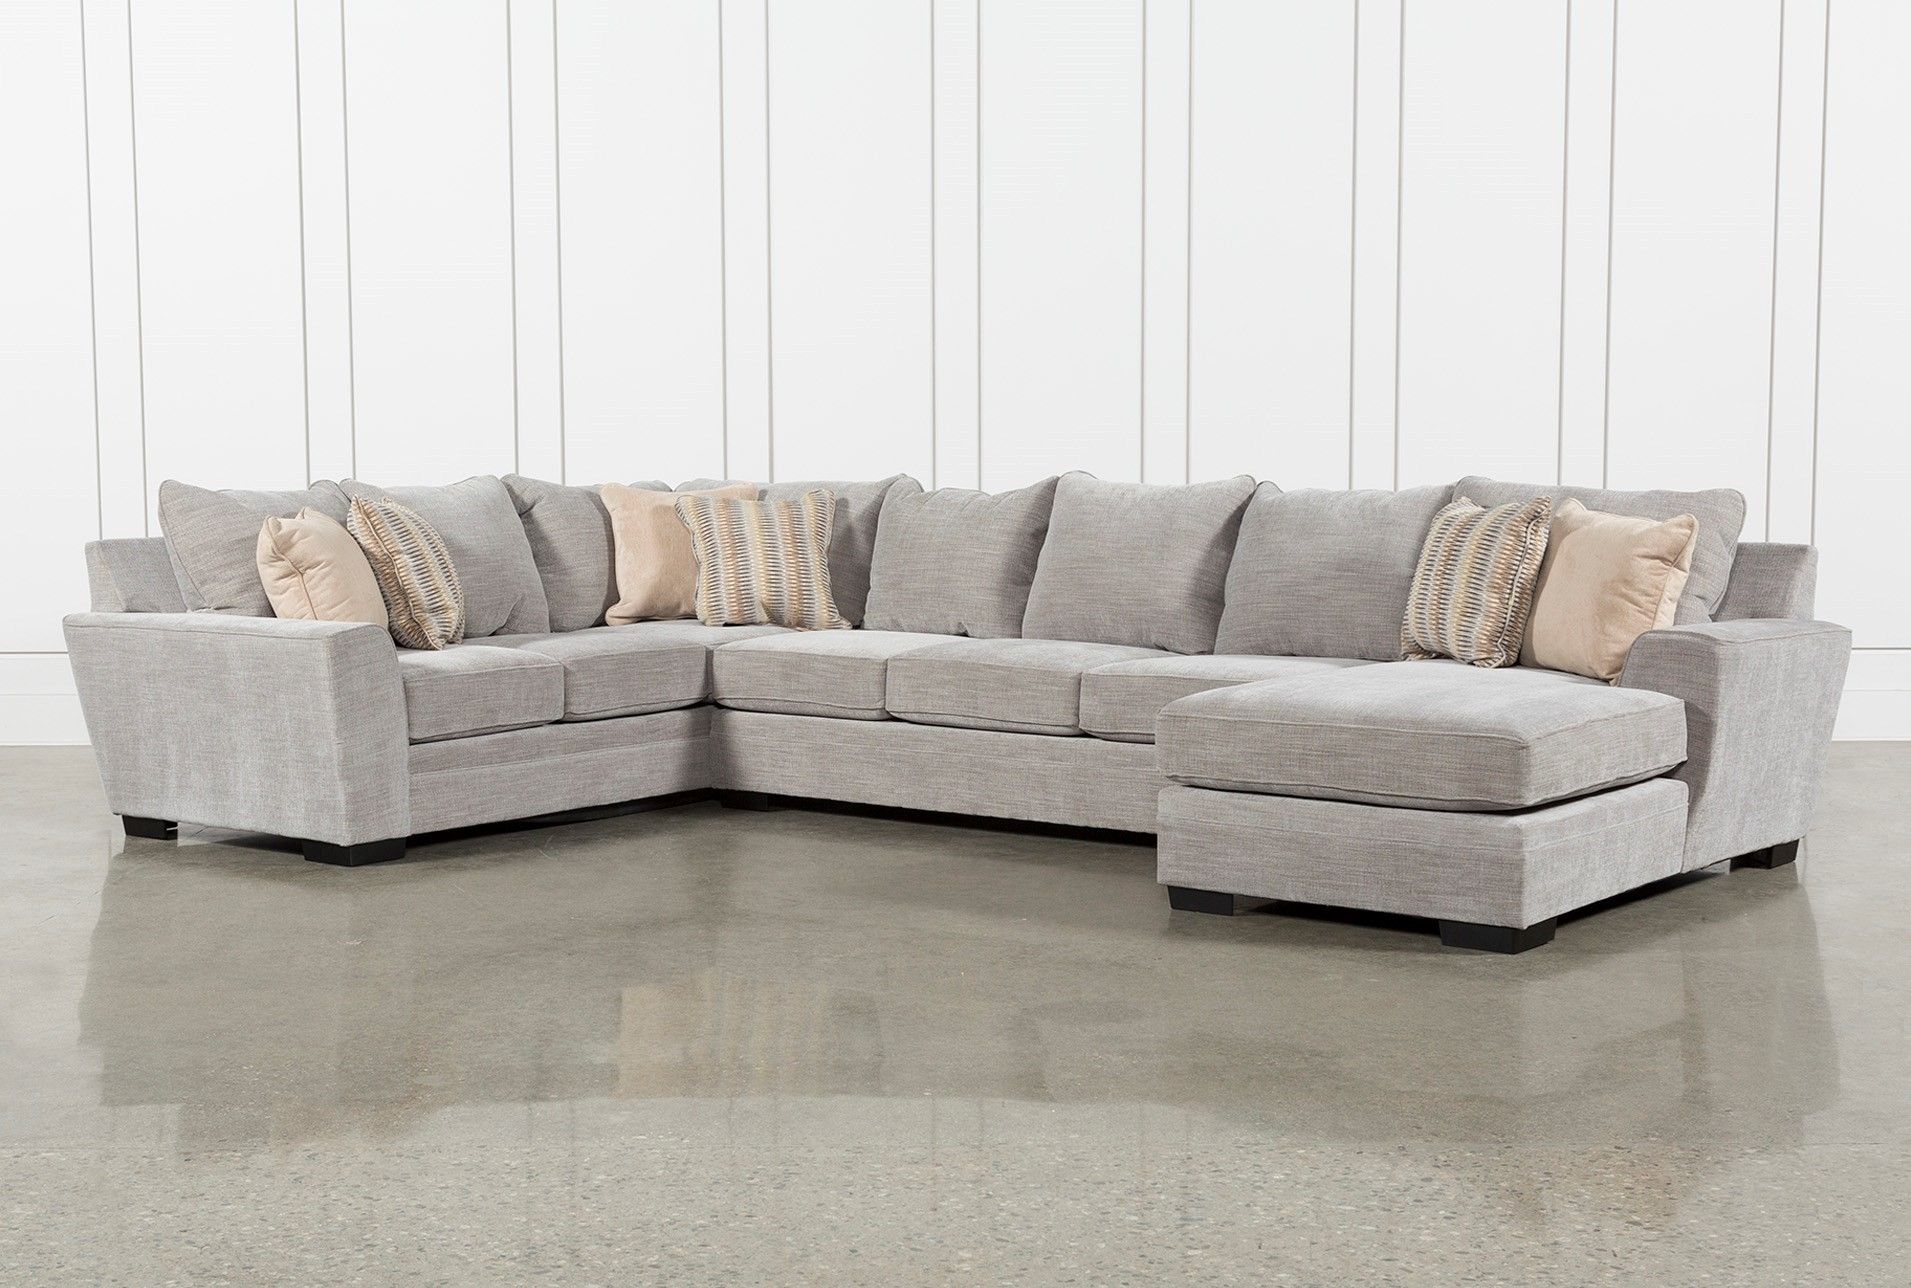 3 Piece Sectional Malbry Point W Laf Chaise Living Spaces 223533 0 Intended For Malbry Point 3 Piece Sectionals With Laf Chaise (View 1 of 30)